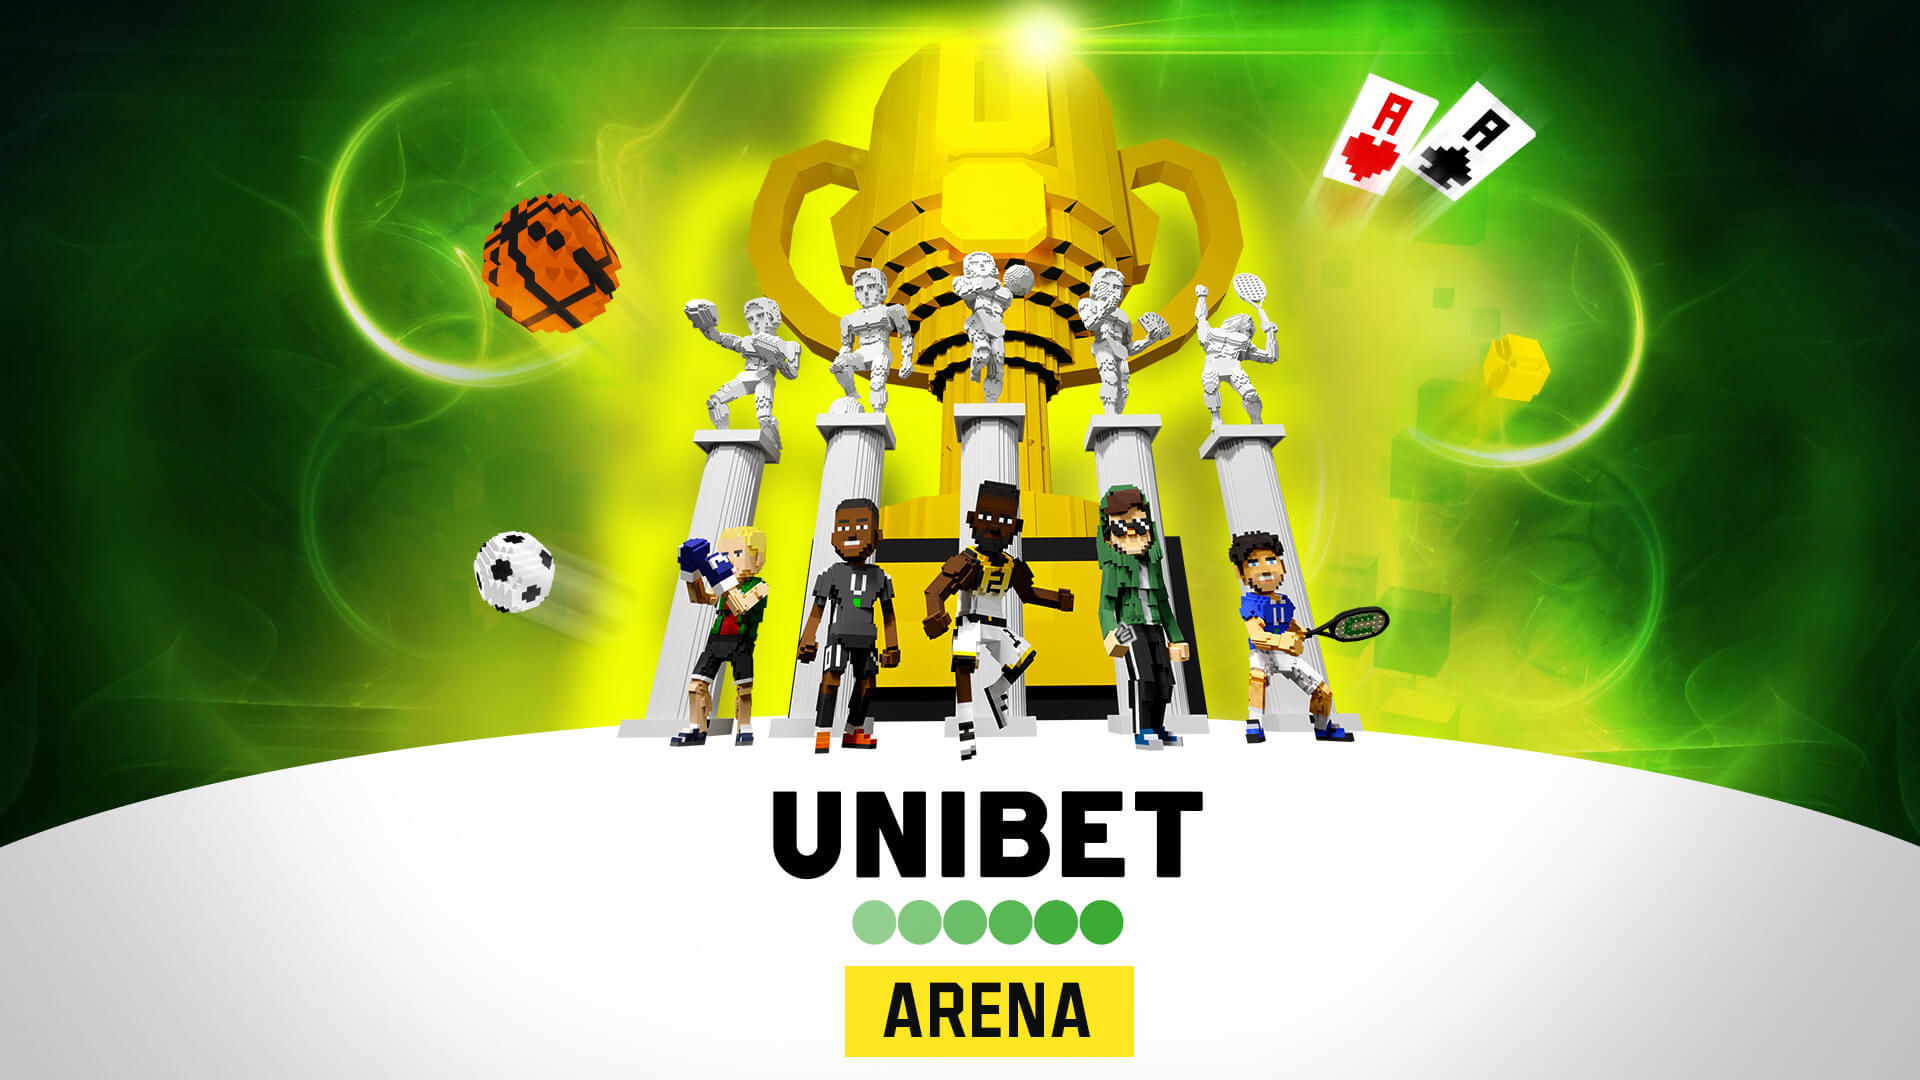 Unibet Heads to the Metaverse